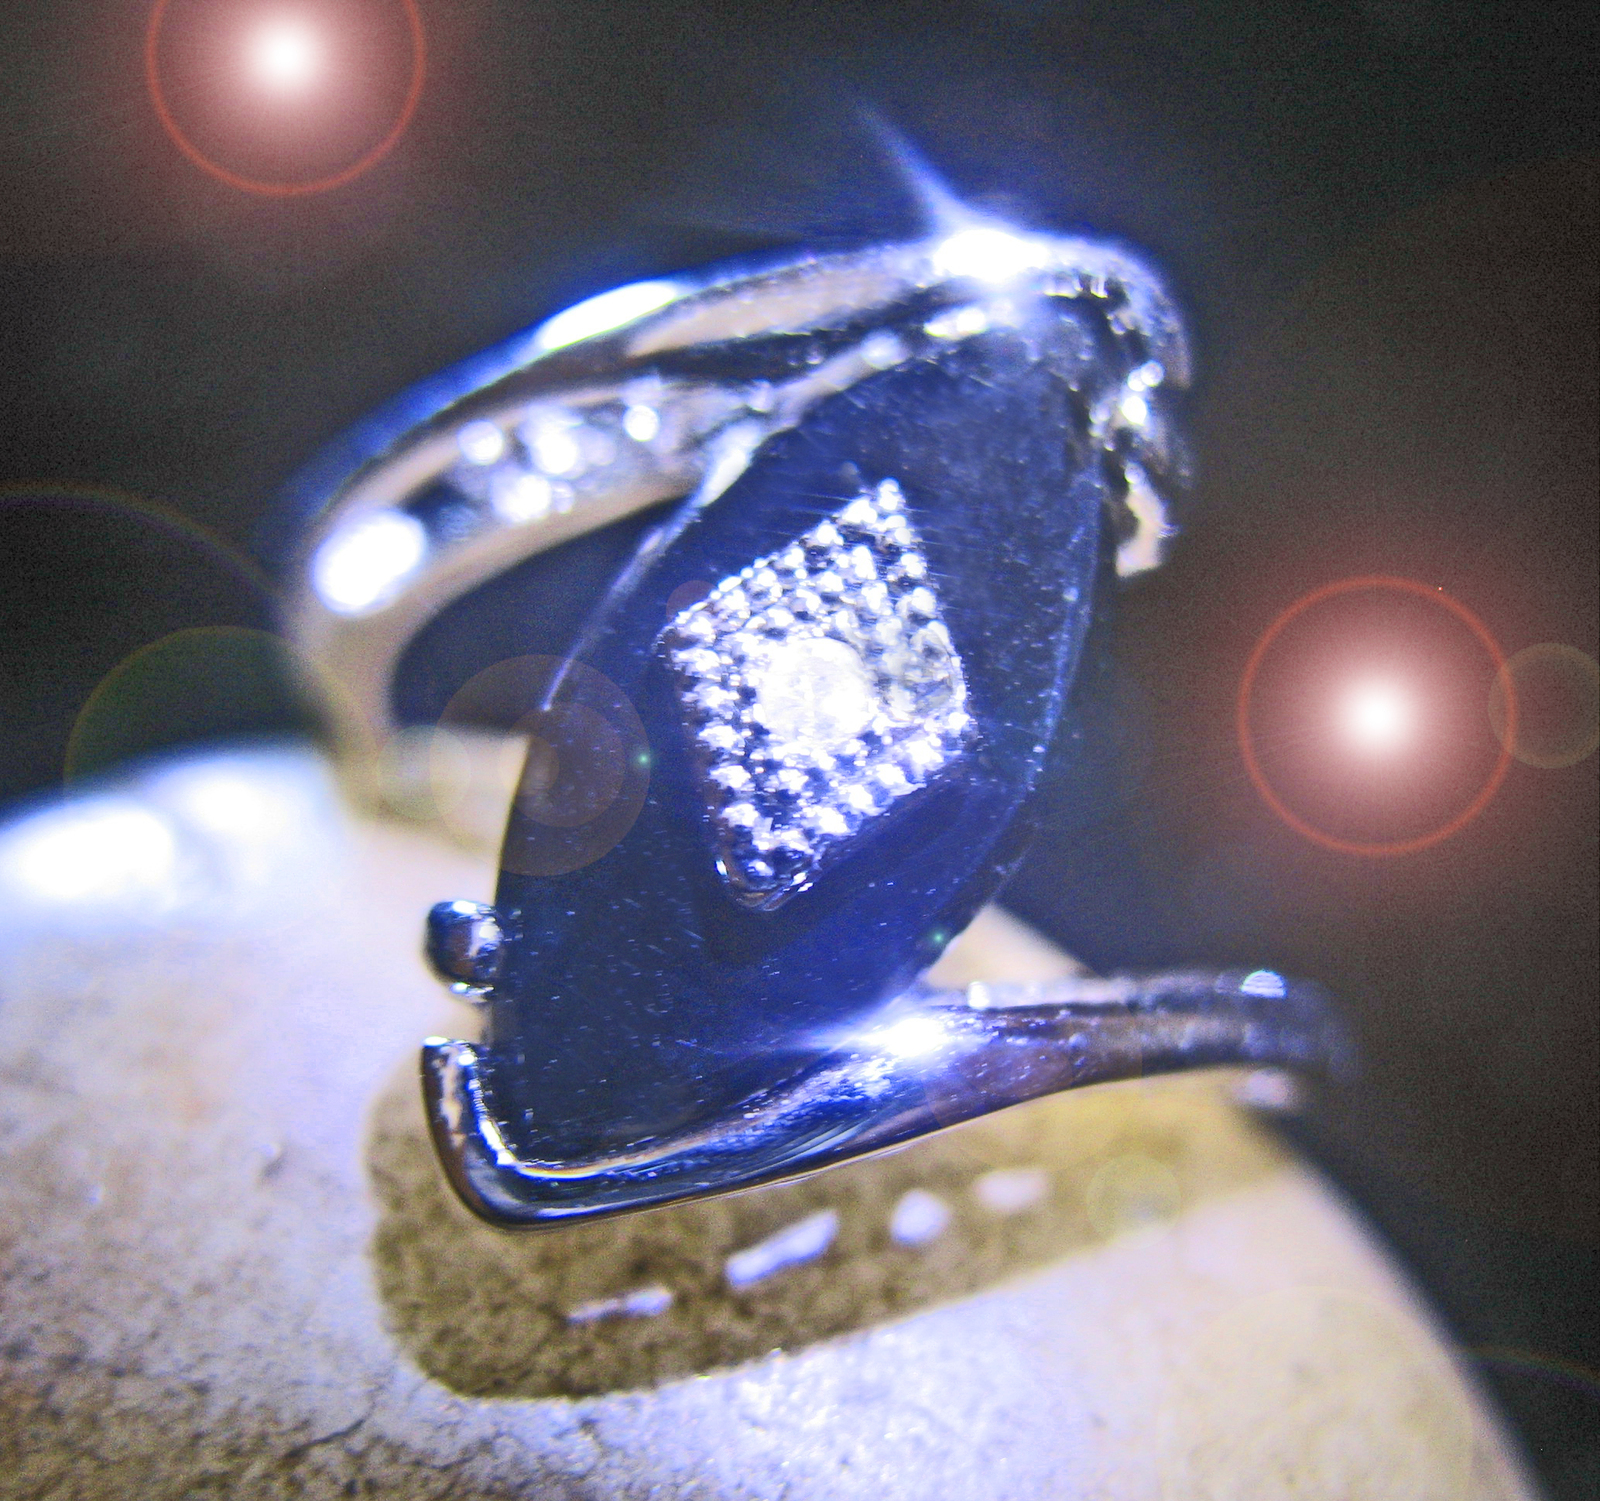 HAUNTED ANTIQUE RING 1000x SORCERERS EYE HIGH OFFERS ONLY OOAK MAGICK 7 SCHOLARS - $200.00